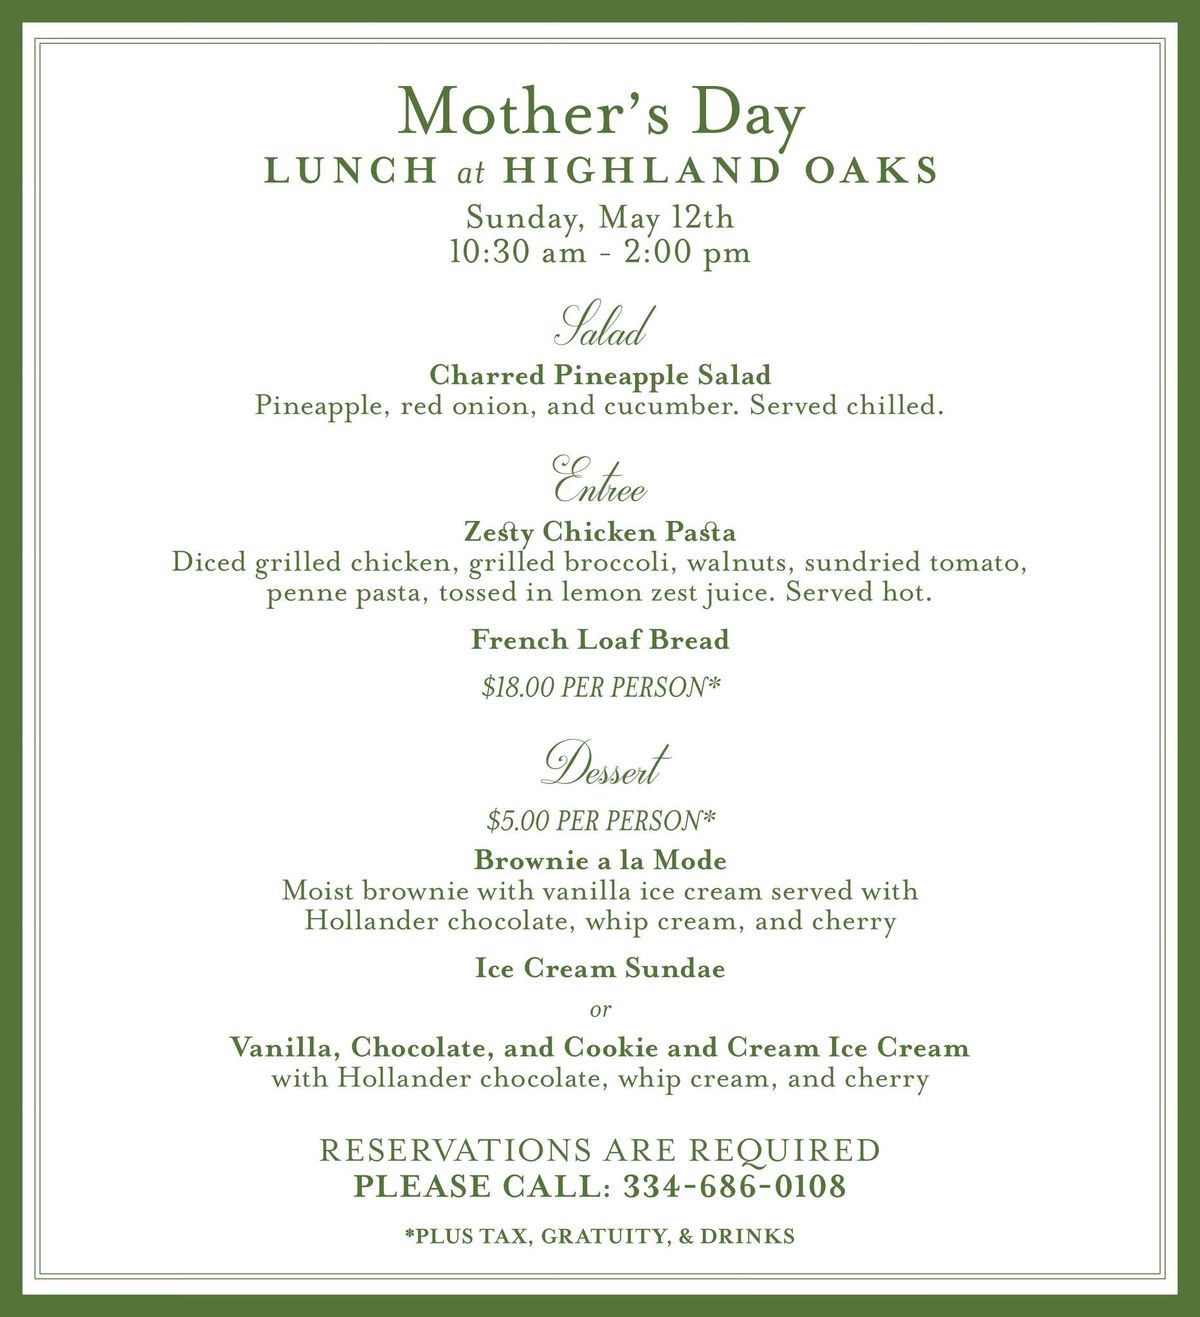 Mother's Day Lunch at Highland Oaks